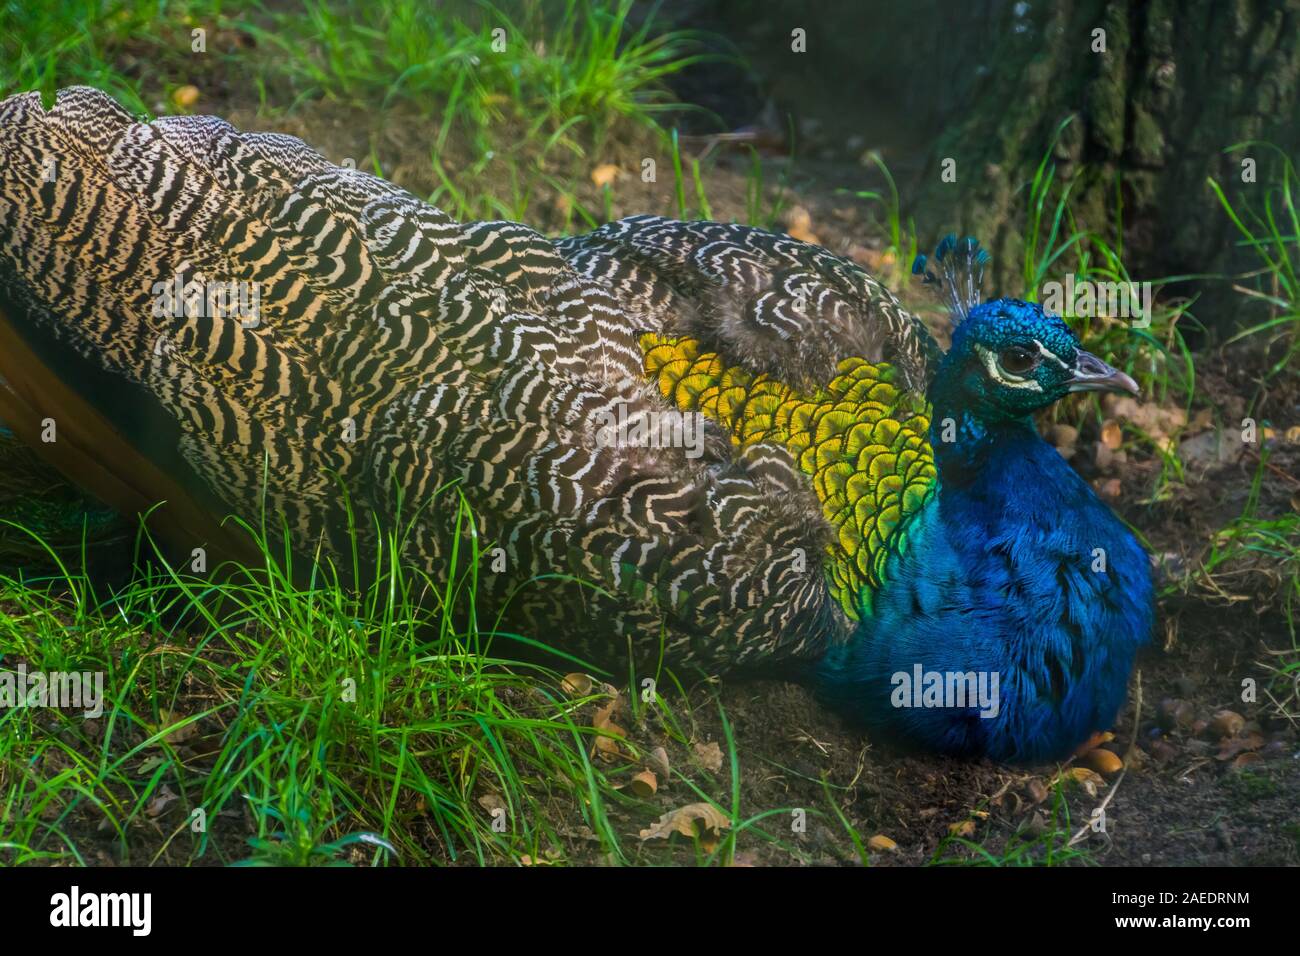 closeup portrait of a blue Indian peafowl, Colorful ornamental peacock, Tropical bird specie from Asia Stock Photo